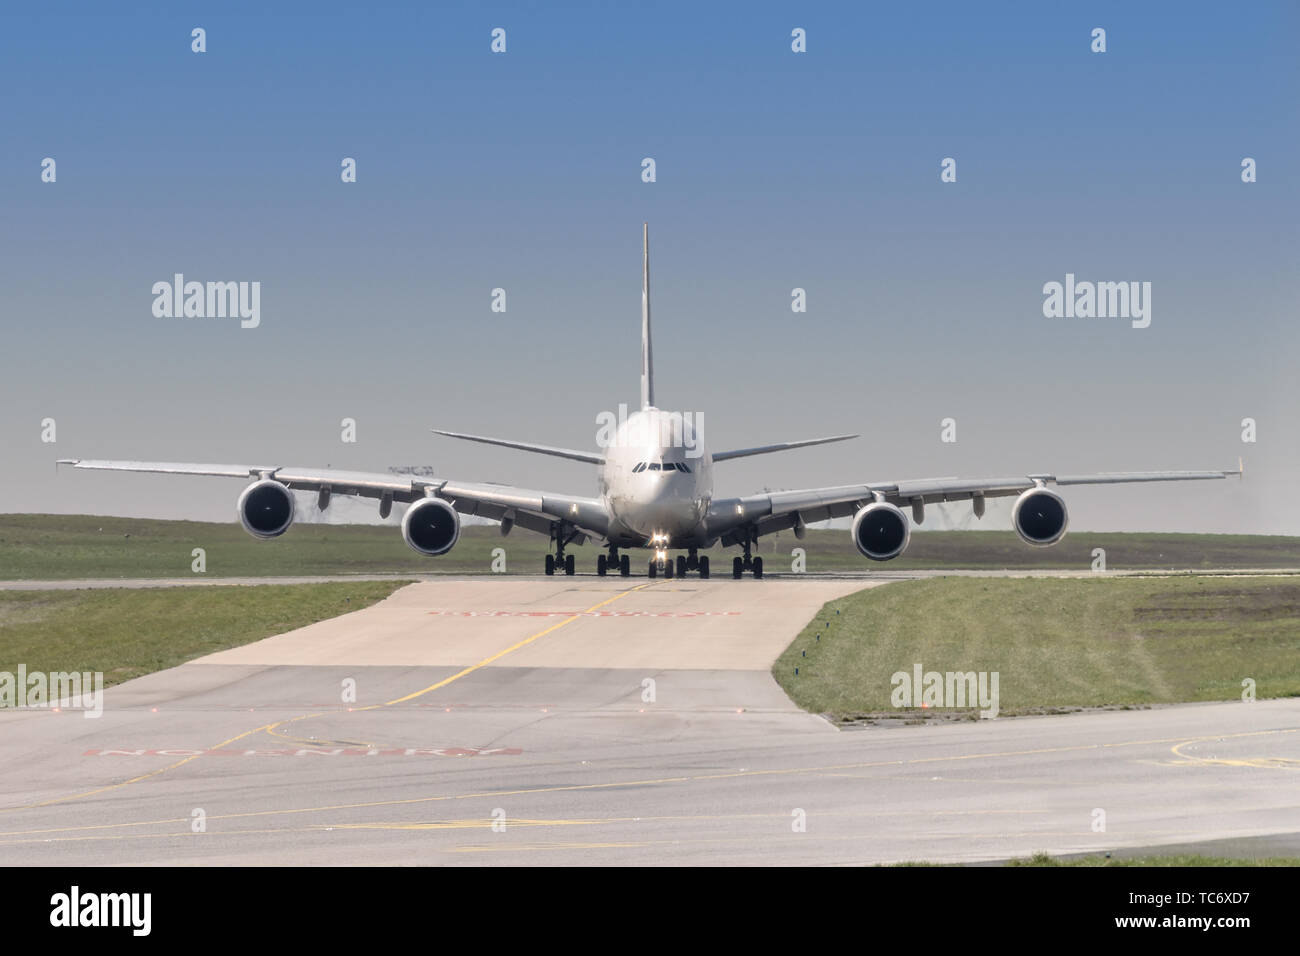 front view of a four engine big jet plane waiting on a taxiway for taking off permission. Stock Photo